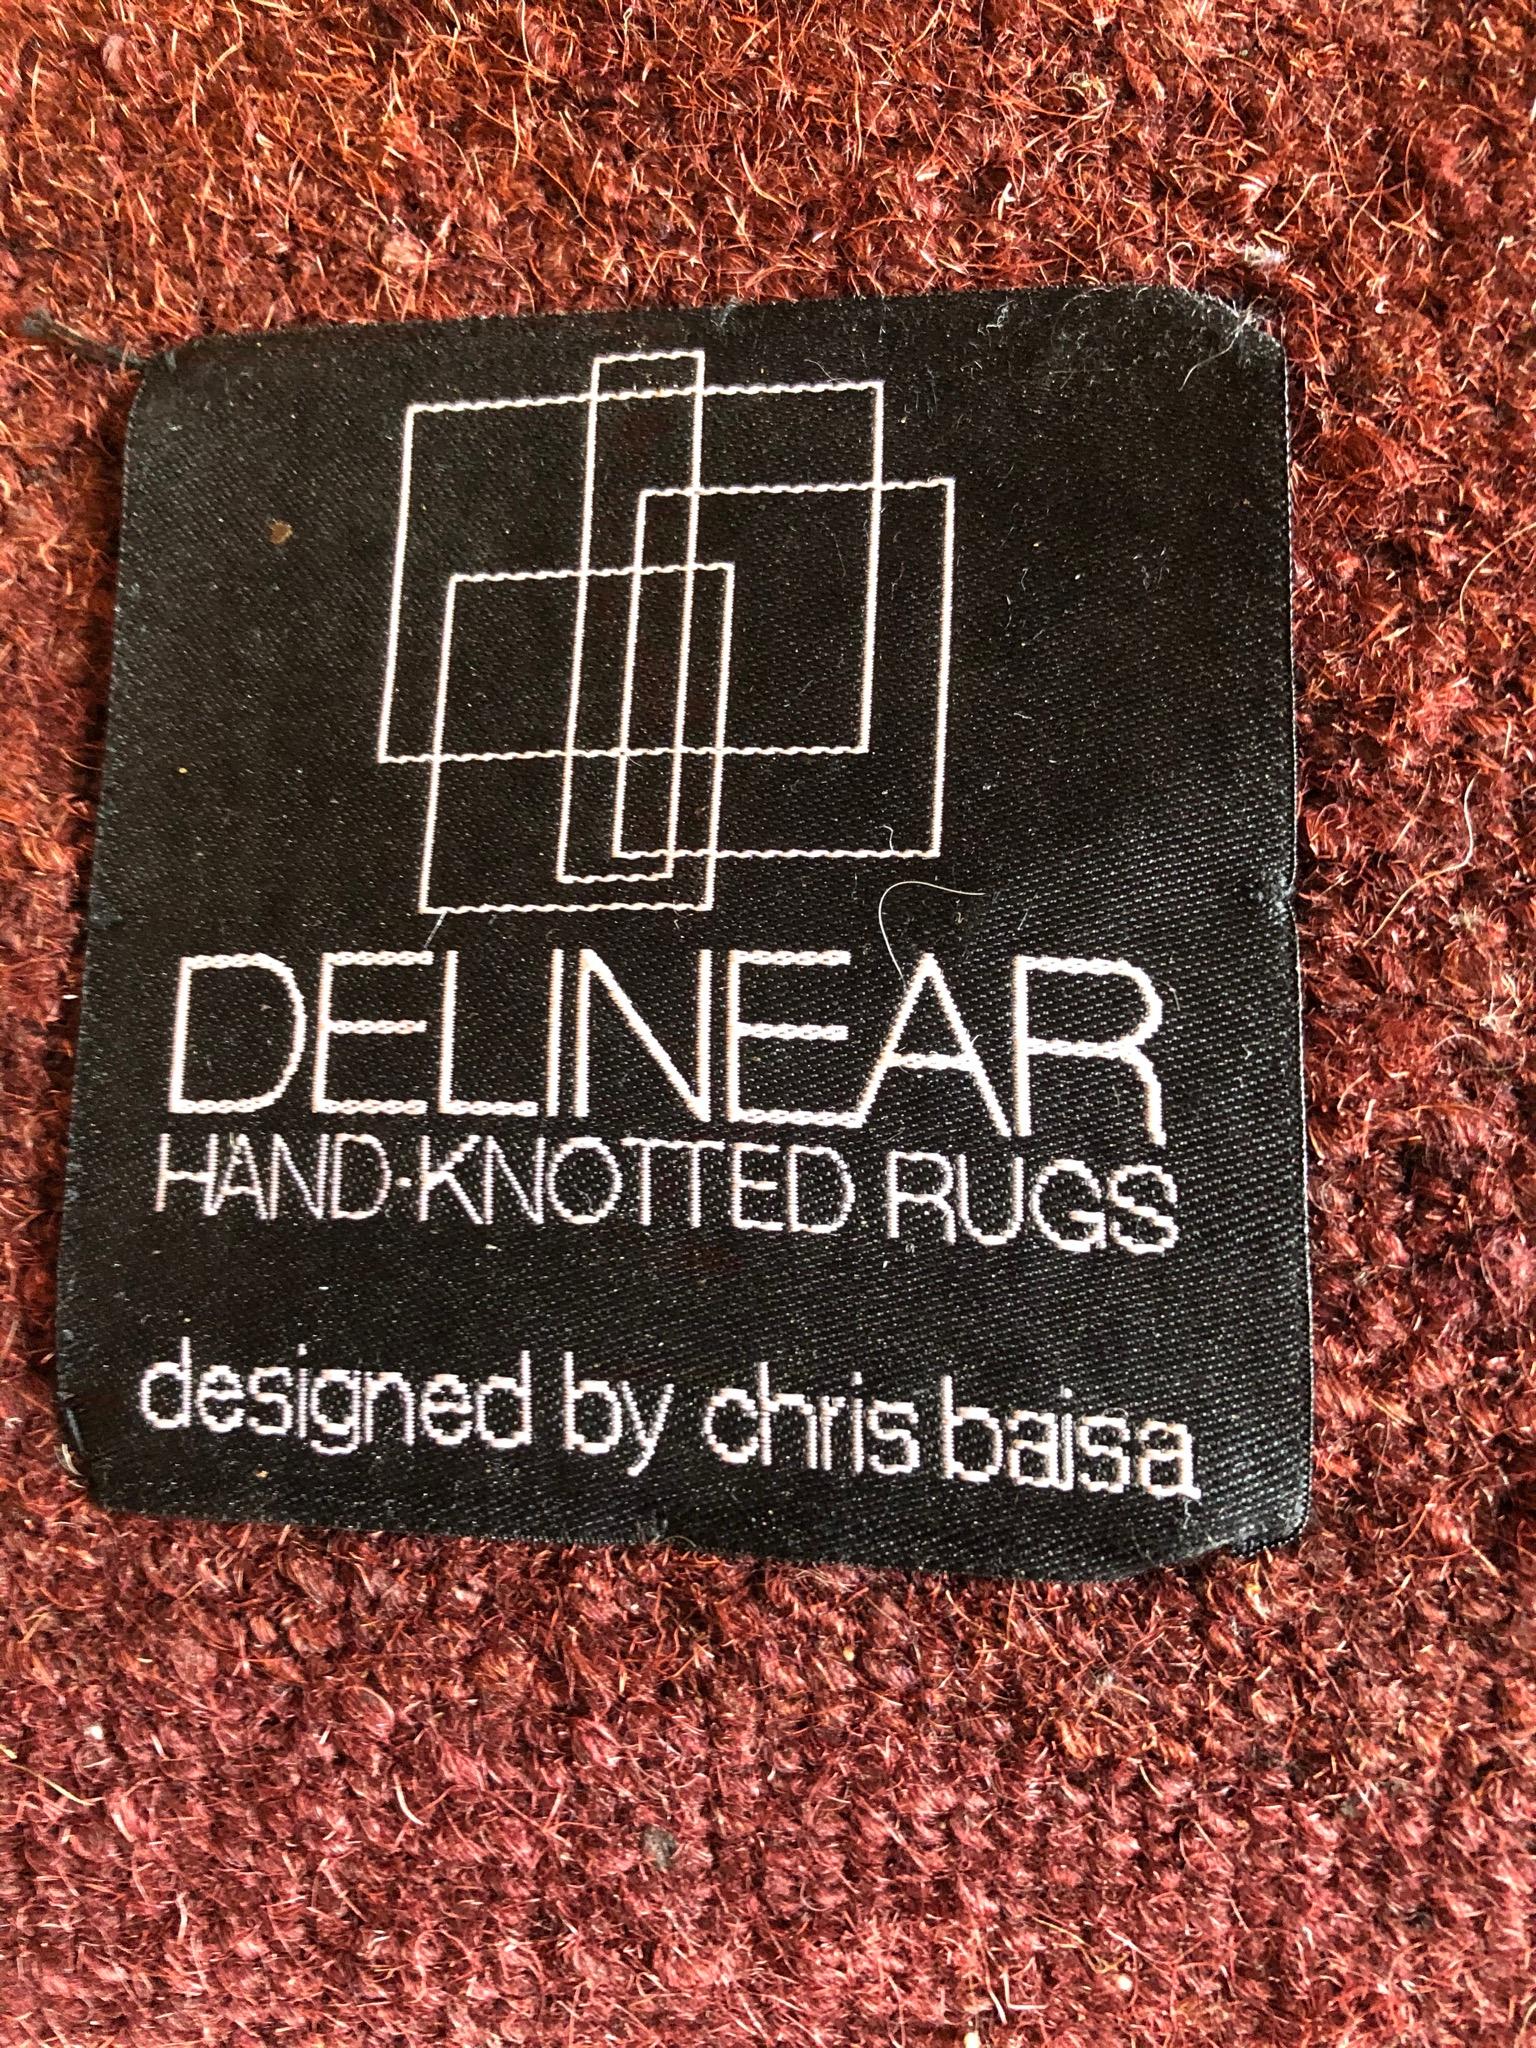 Delinear Inc. was founded in San Francisco in 1996 by Chris Baisa, whose creative work spans textile, product and furniture design. Baisa’s Gridloc tables were sold at SFMOMA, The Art Institute Chicago and Design Within Reach. His rug designs have